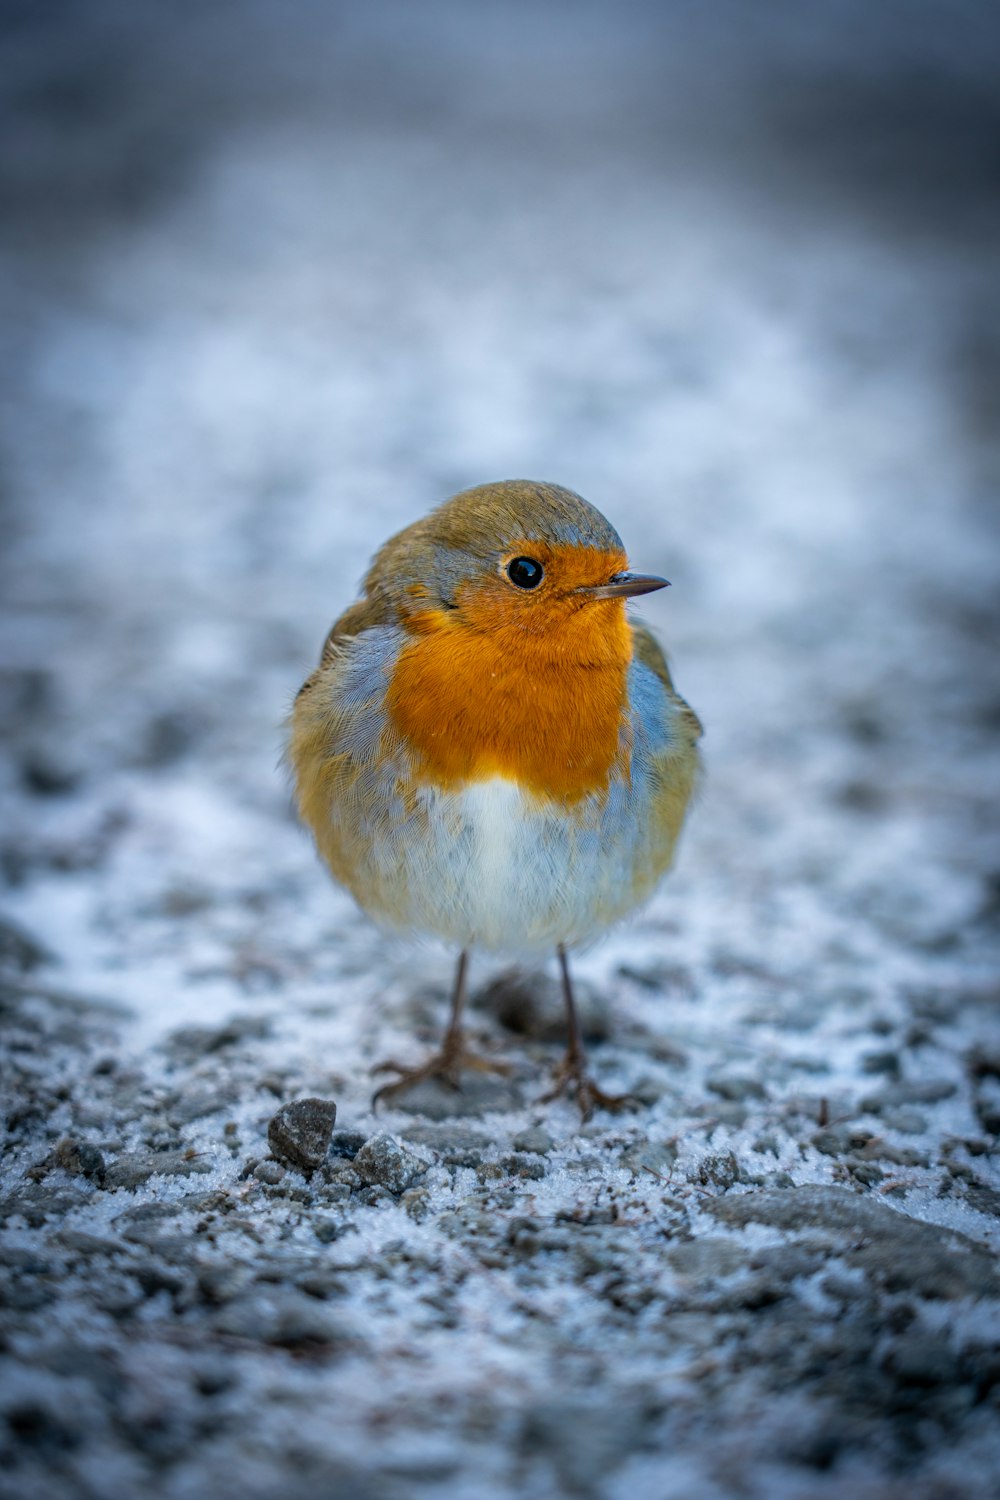 a small orange and blue bird standing in the snow